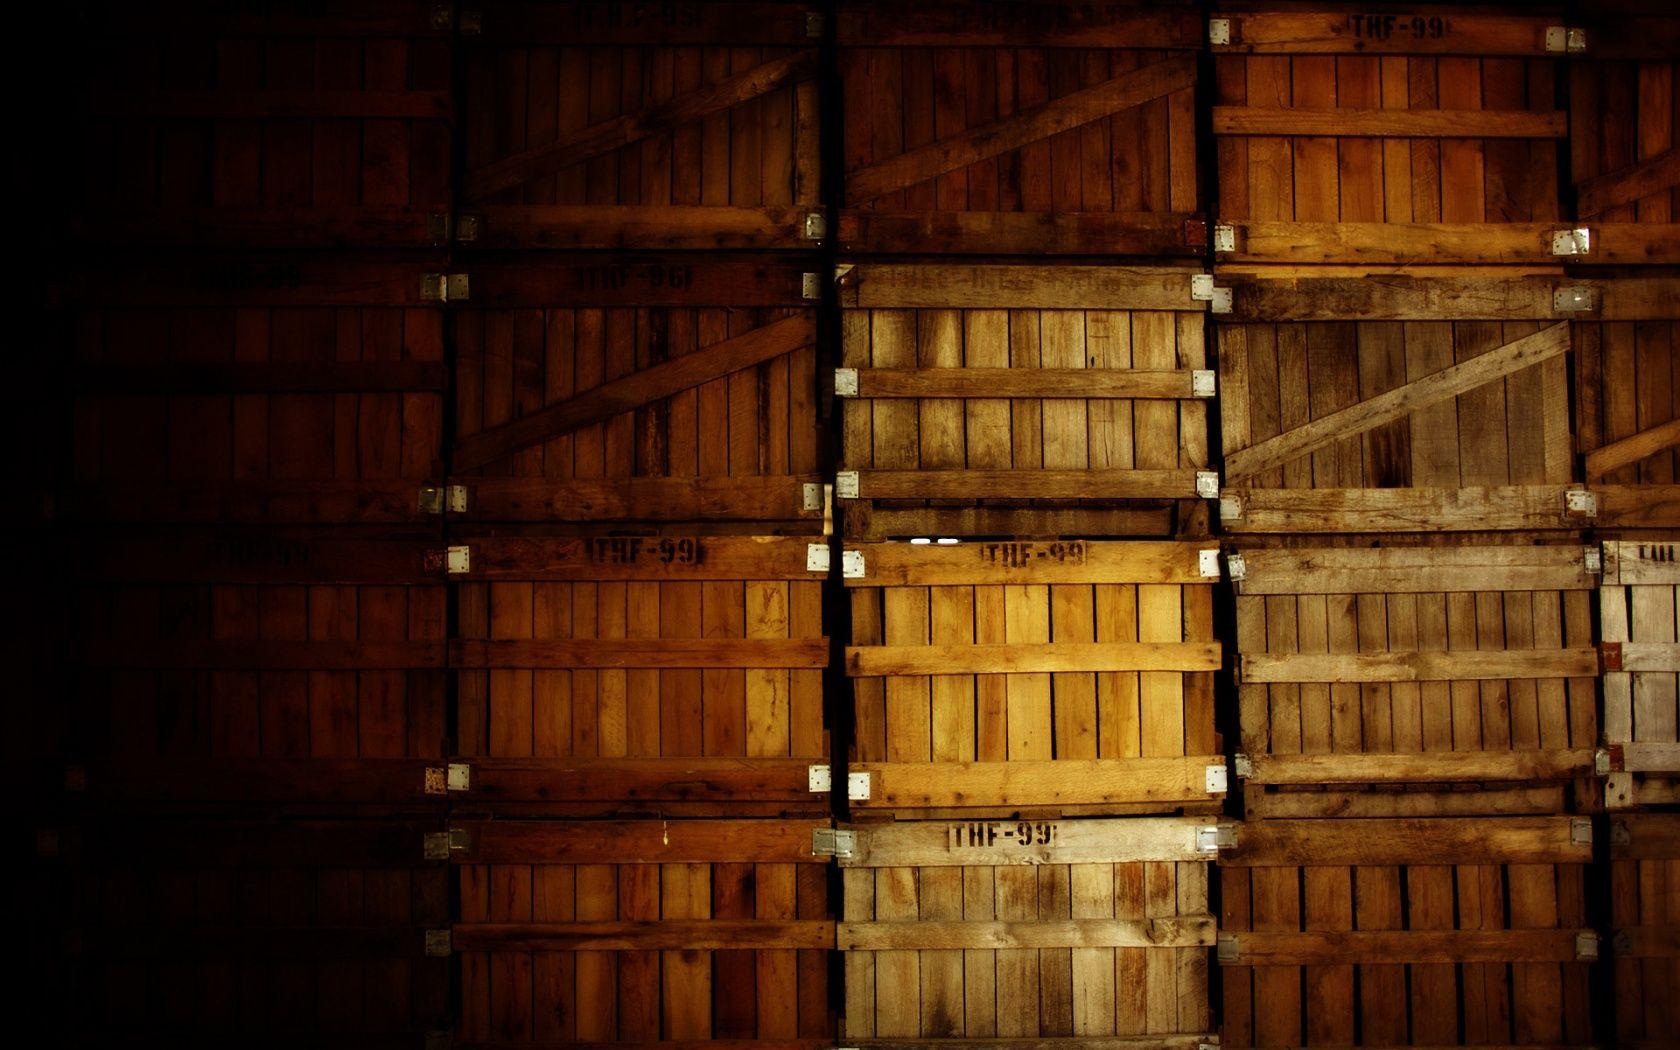 Boxes Warehouse wallpaper and image, picture, photo